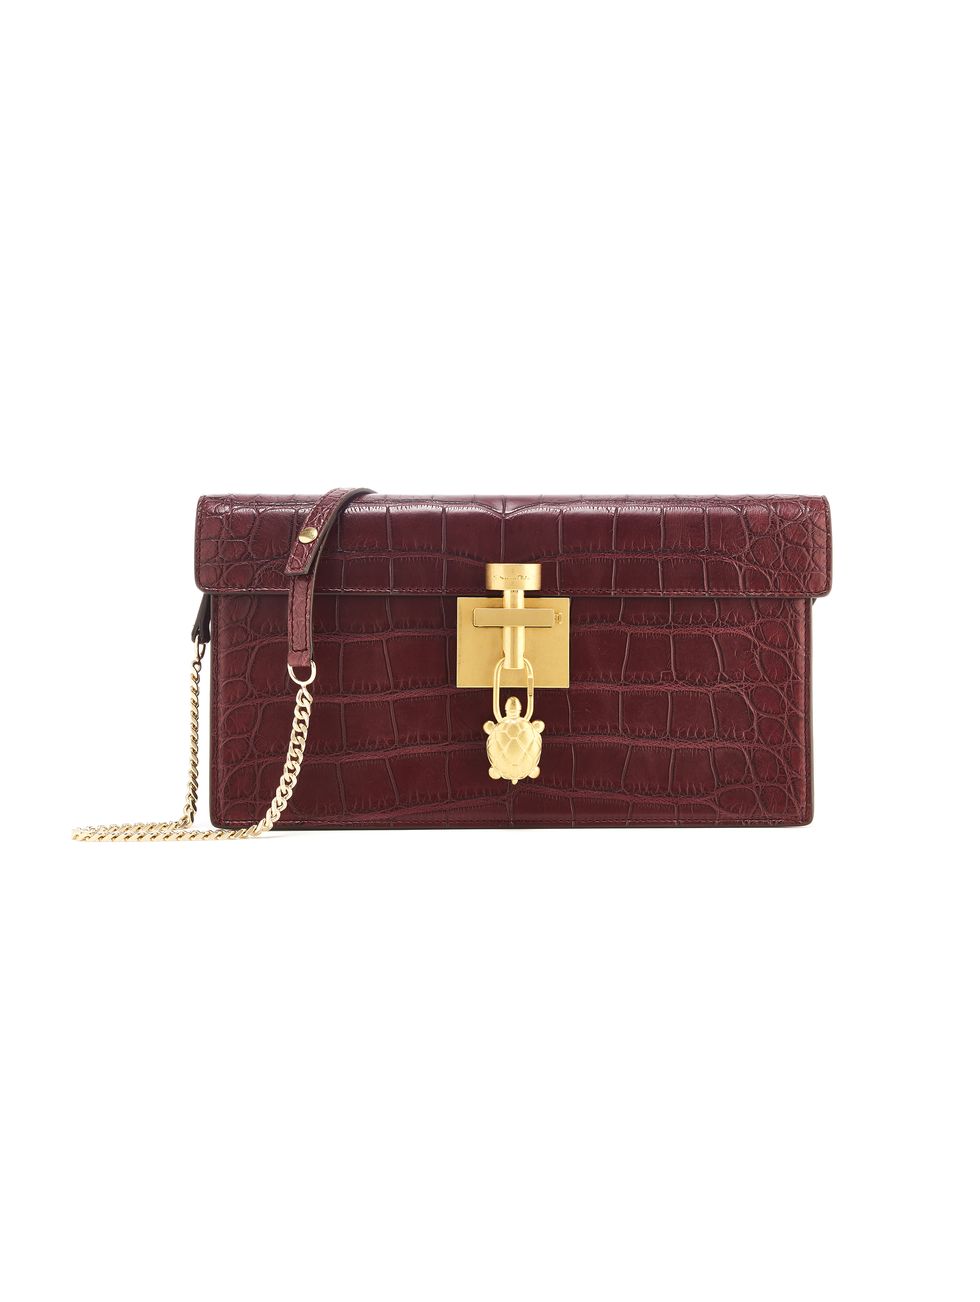 Wallet, Red, Fashion accessory, Bag, Leather, Handbag, Maroon, Tan, Rectangle, Material property, 